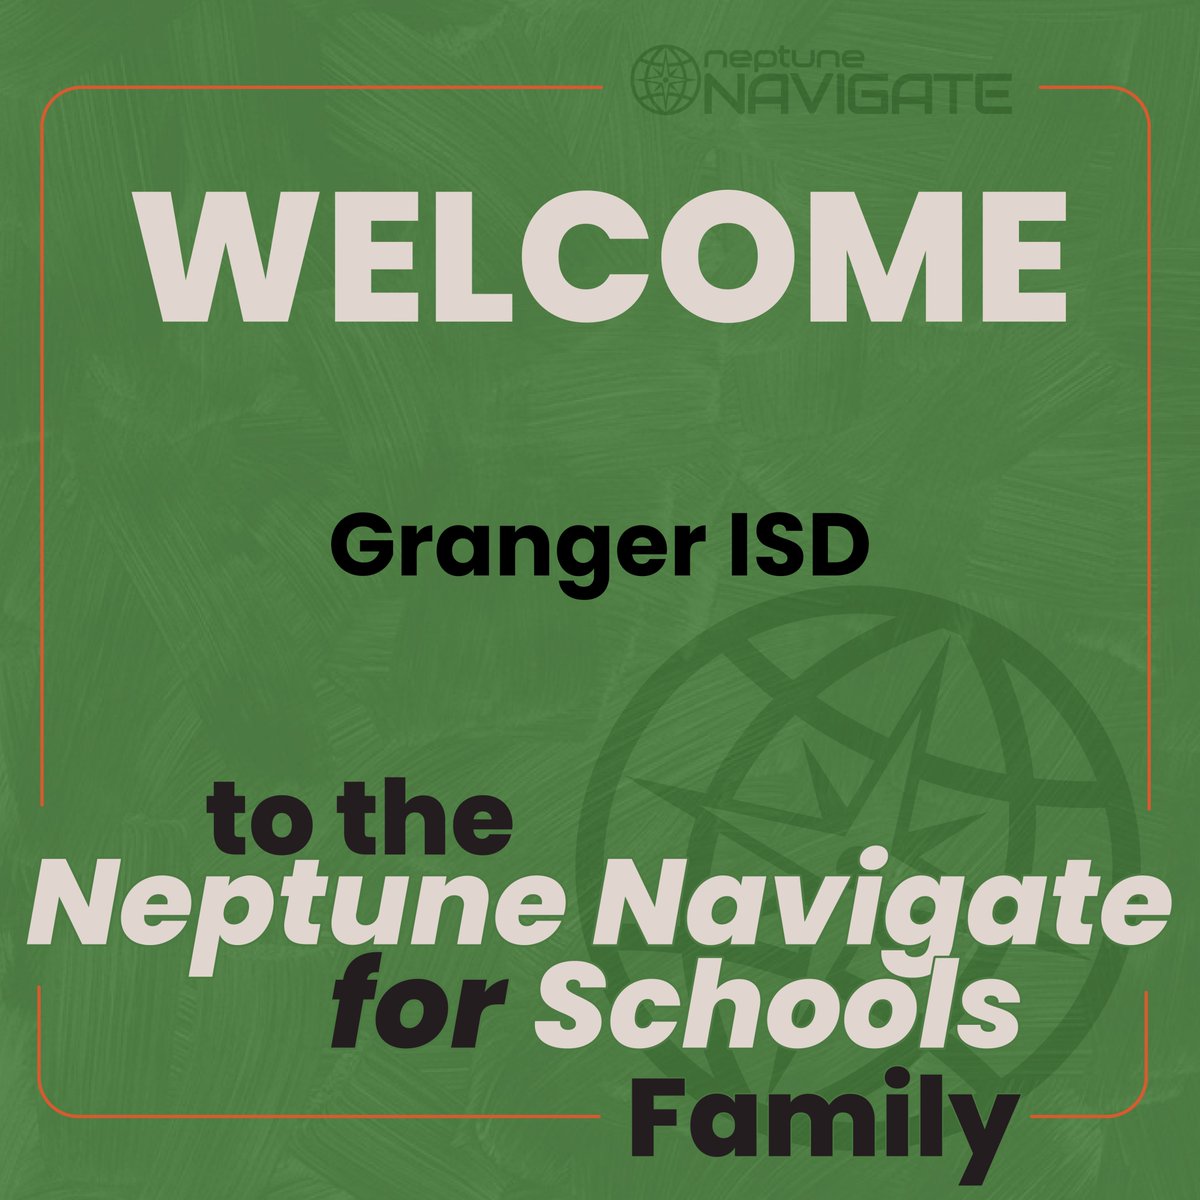 Our newest Neptune Navigate partner is Granger ISD in Texas! We’re eager to work together to teach your students how to be smart and stay safe online. Welcome, @Granger_Lions! 🌐💡